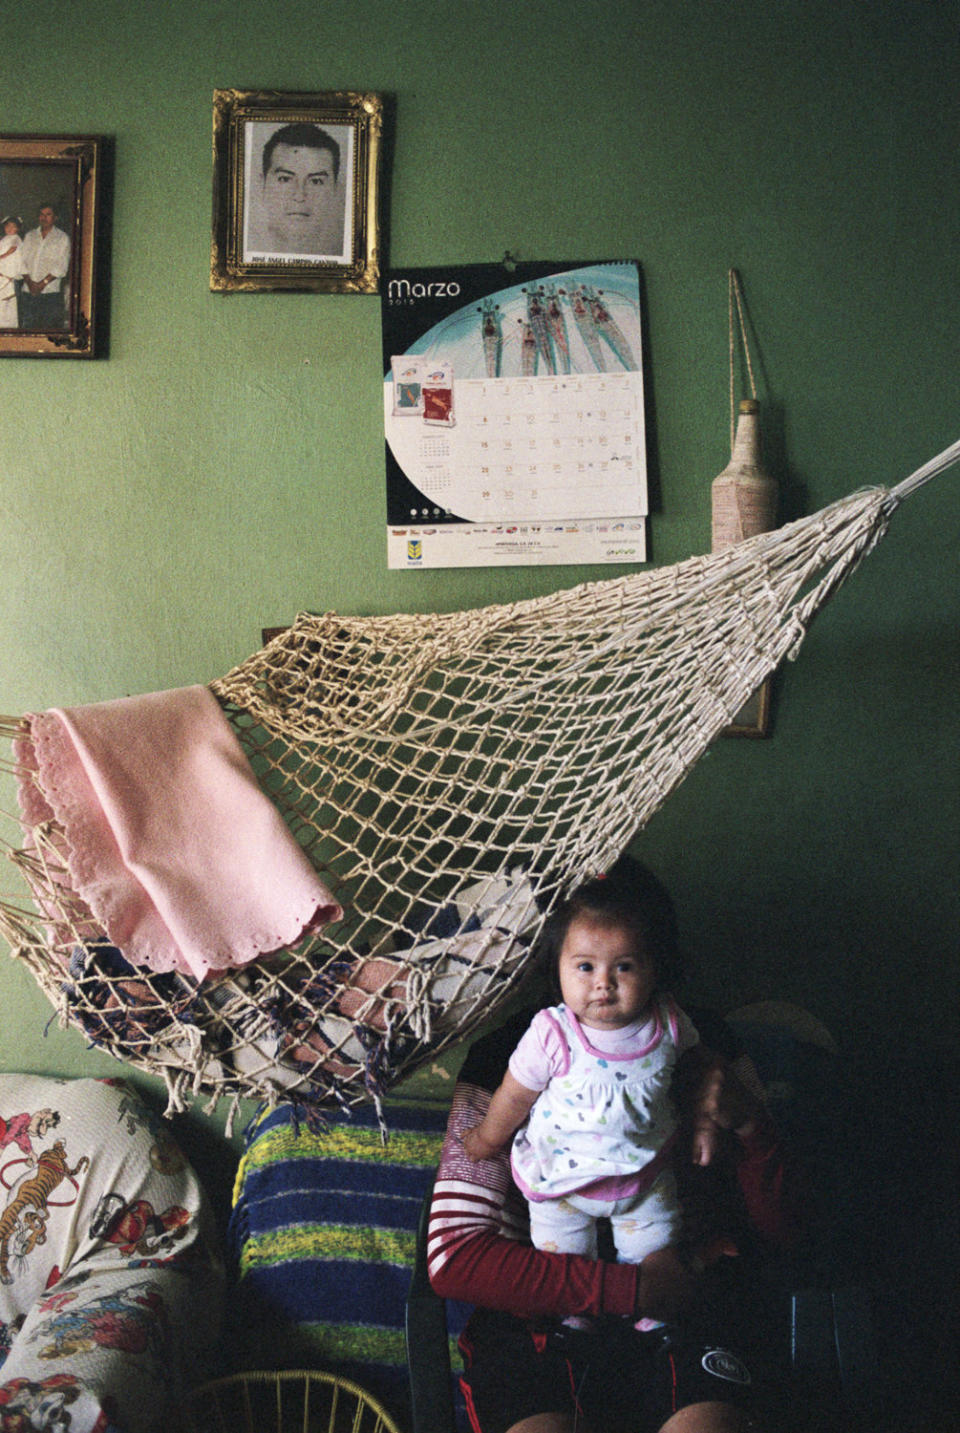 A relative holds Gaby, the baby daughter of missing student Jos&eacute; &Aacute;ngel Campos Cantor, on March 18, 2015.&nbsp;His portrait&nbsp;hangs on the wall behind her. His other daughter, America, is 8 years old.&nbsp;